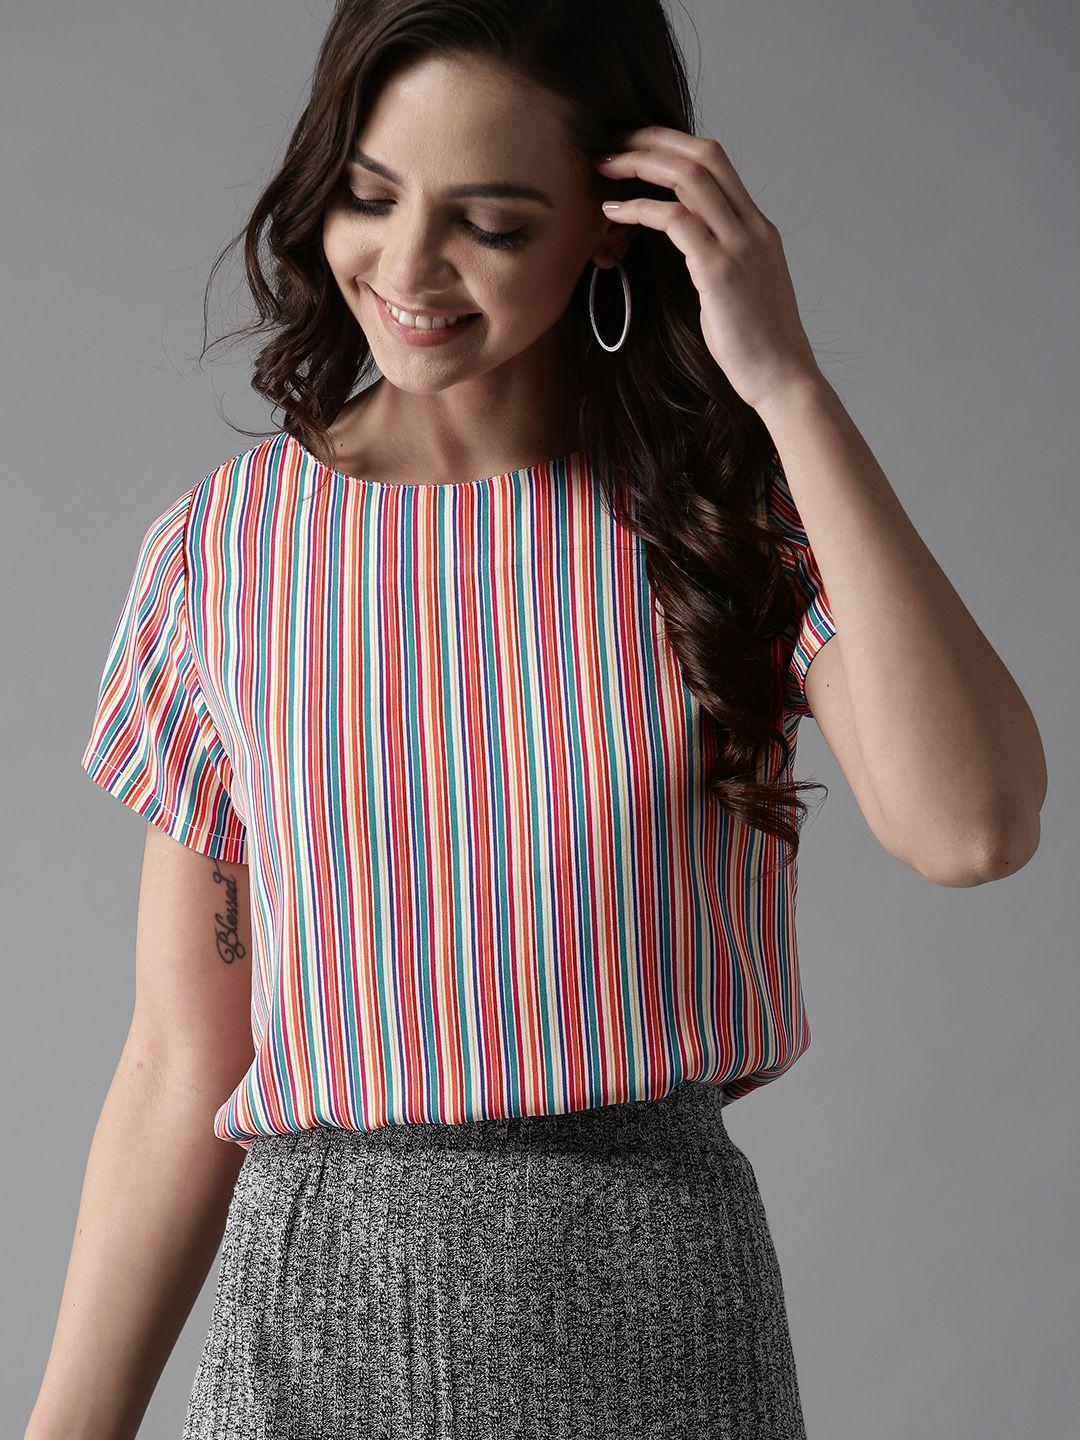 here&now candy store multi-toned striped top